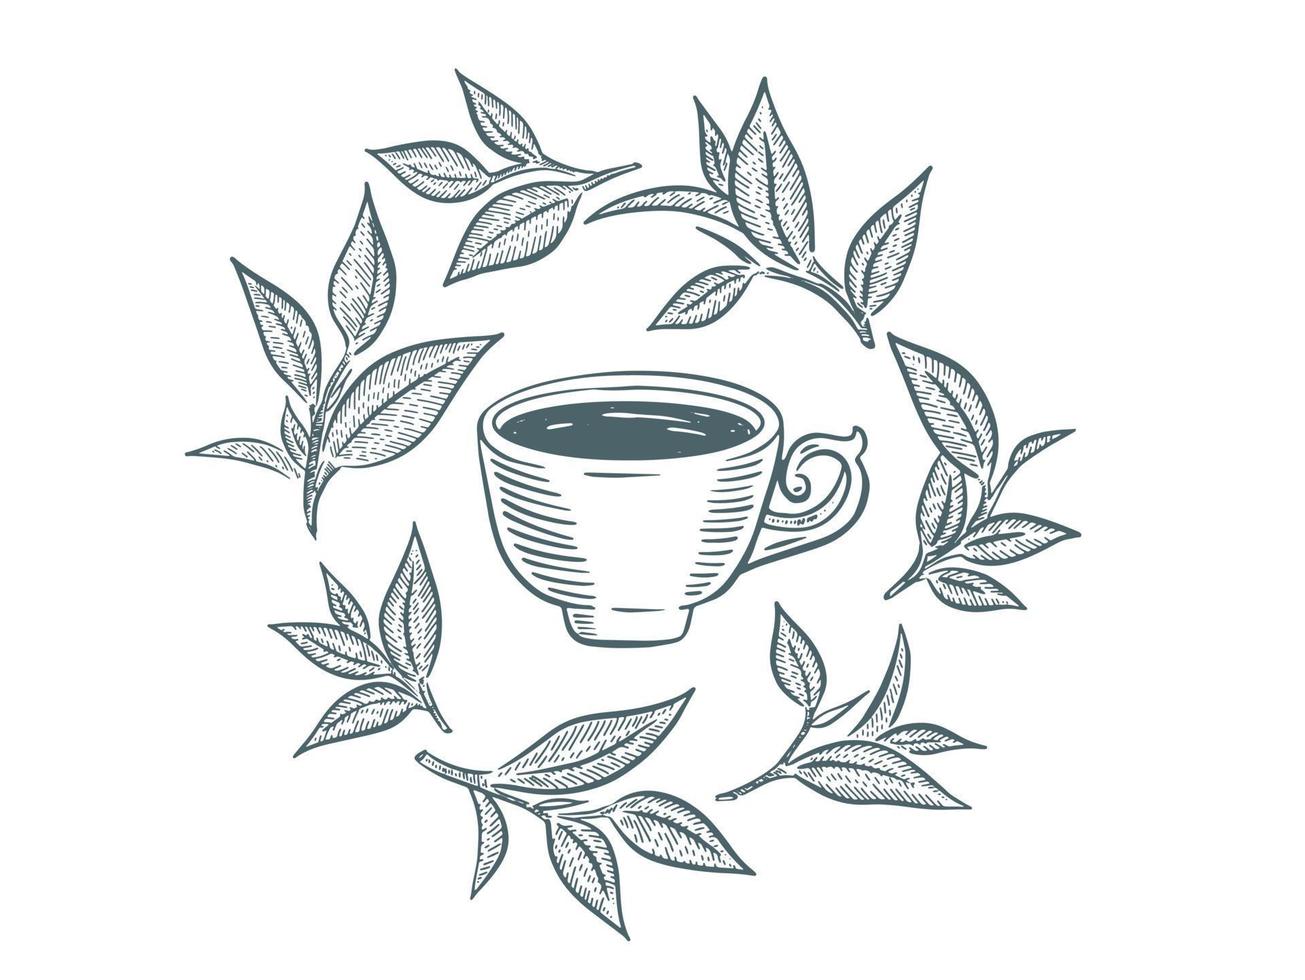 Green Tea Cup, hand drawn, drawing isolated on white vector